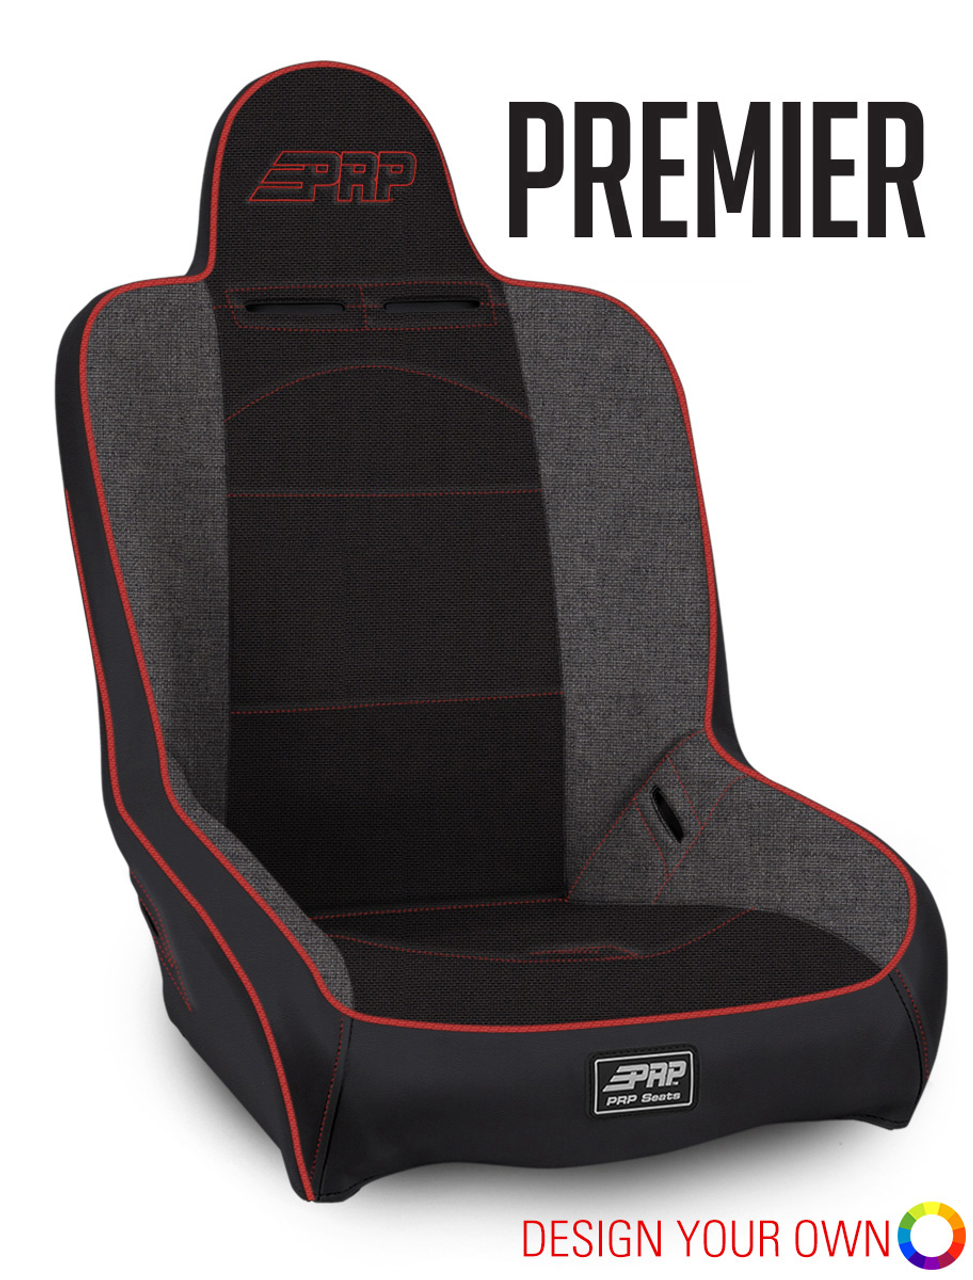 Premier High Back, Extra Wide and 2" XT Suspension Seat